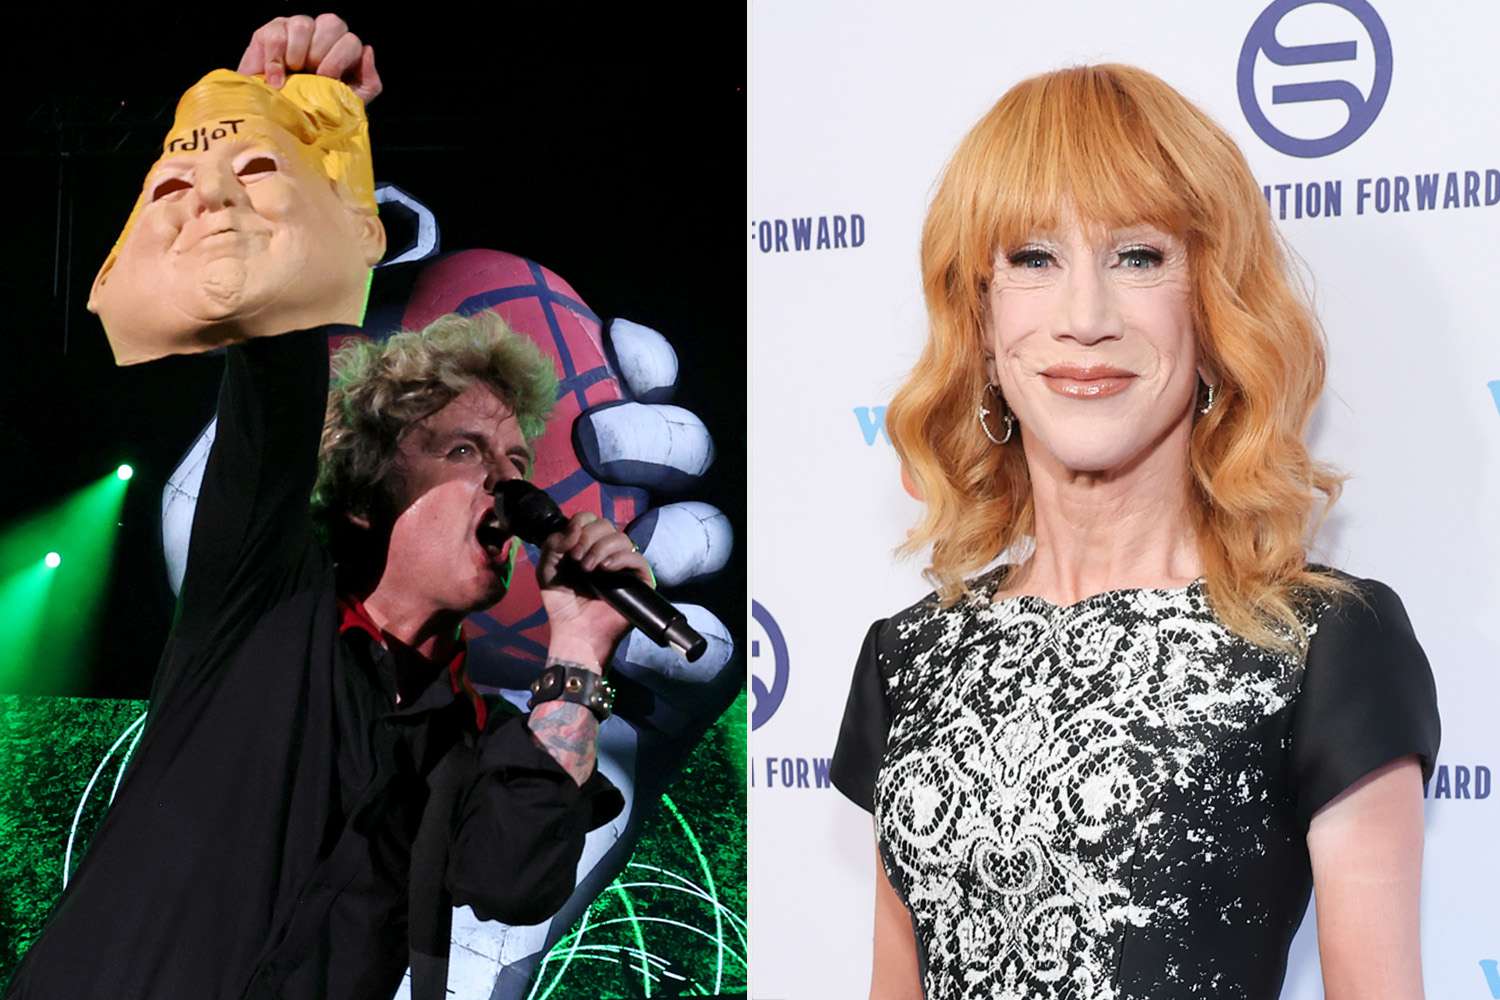 Green Day singer Billie Joe Armstrong holds Donald Trump mask at concert, Kathy Griffin reacts: 'I see you'